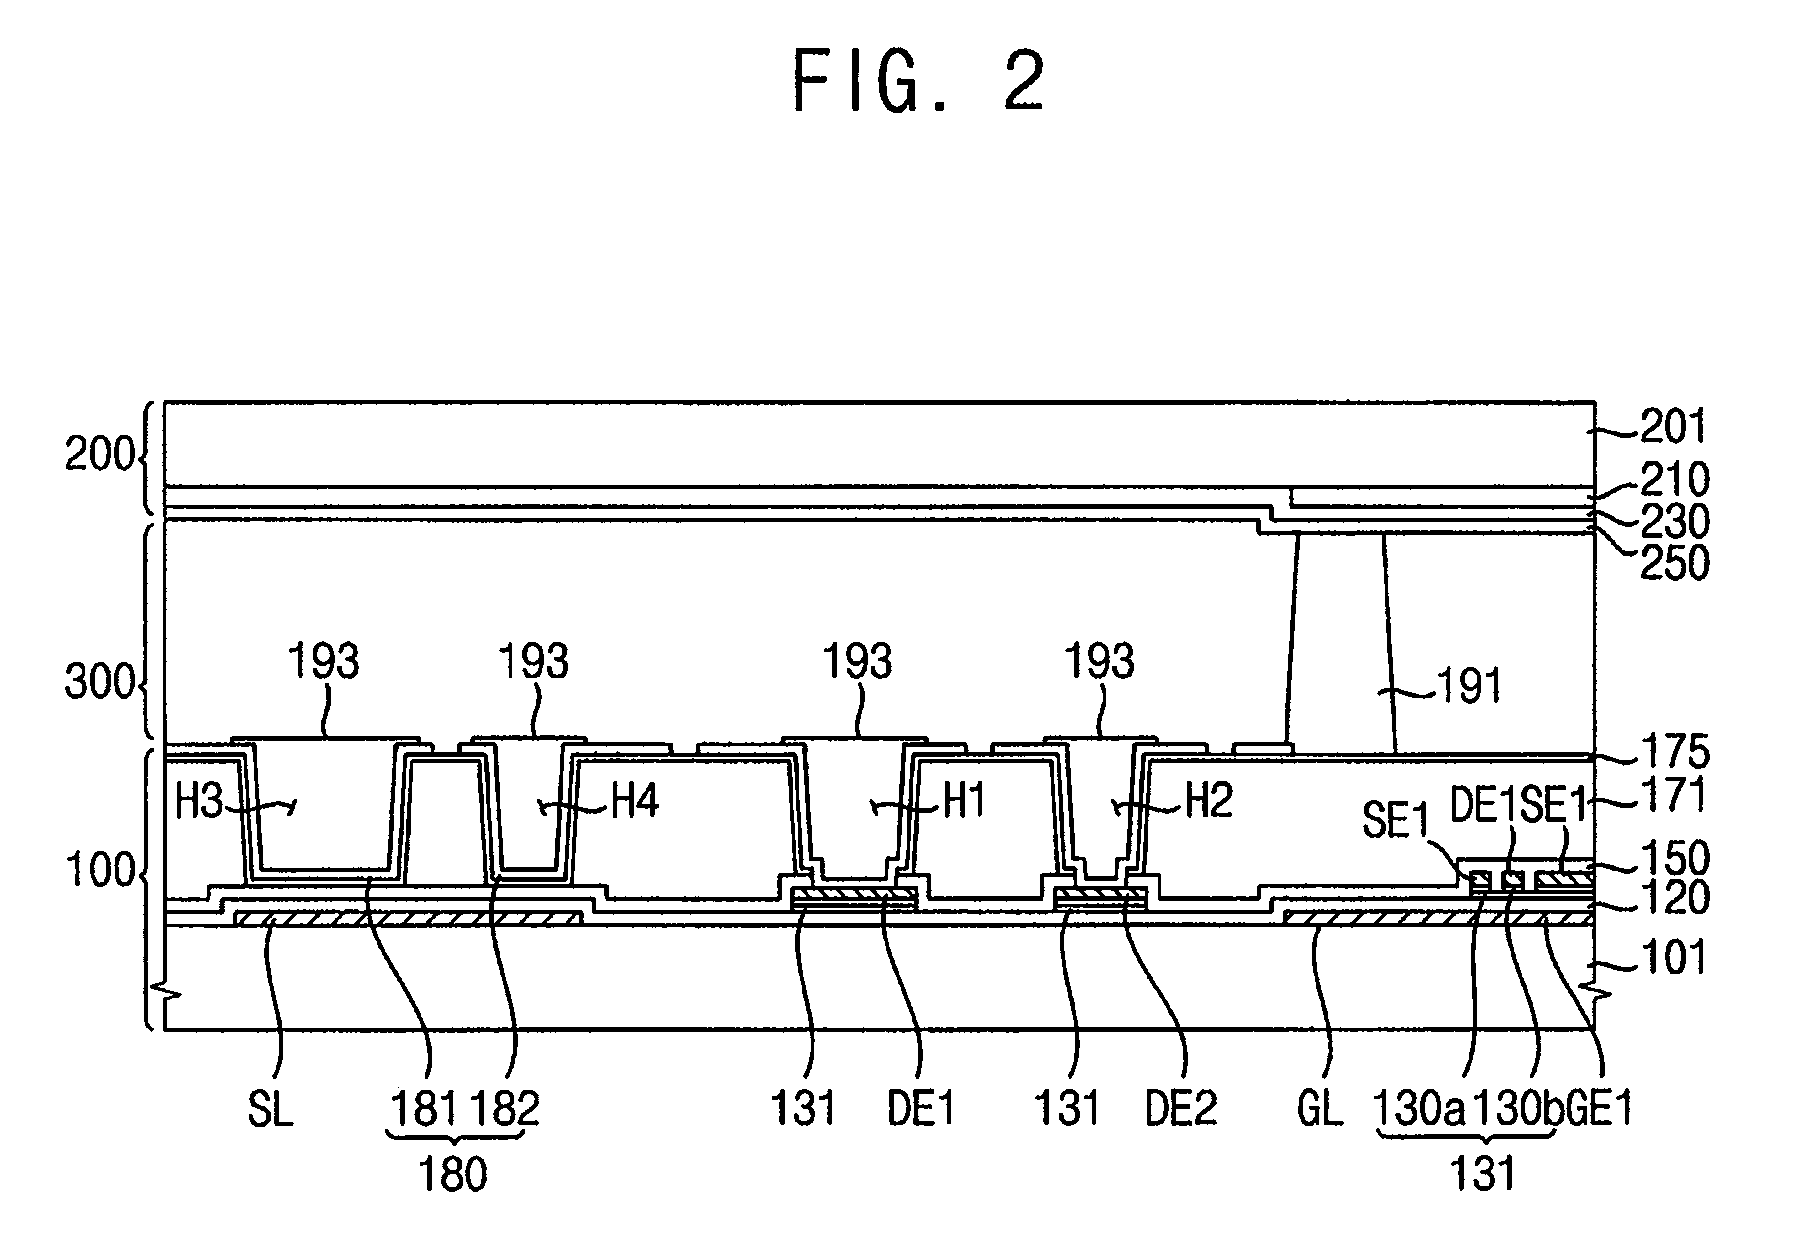 Display Substrate, Method Of Manufacturing The Same And Liquid Crystal Display Panel Having The Display Substrate